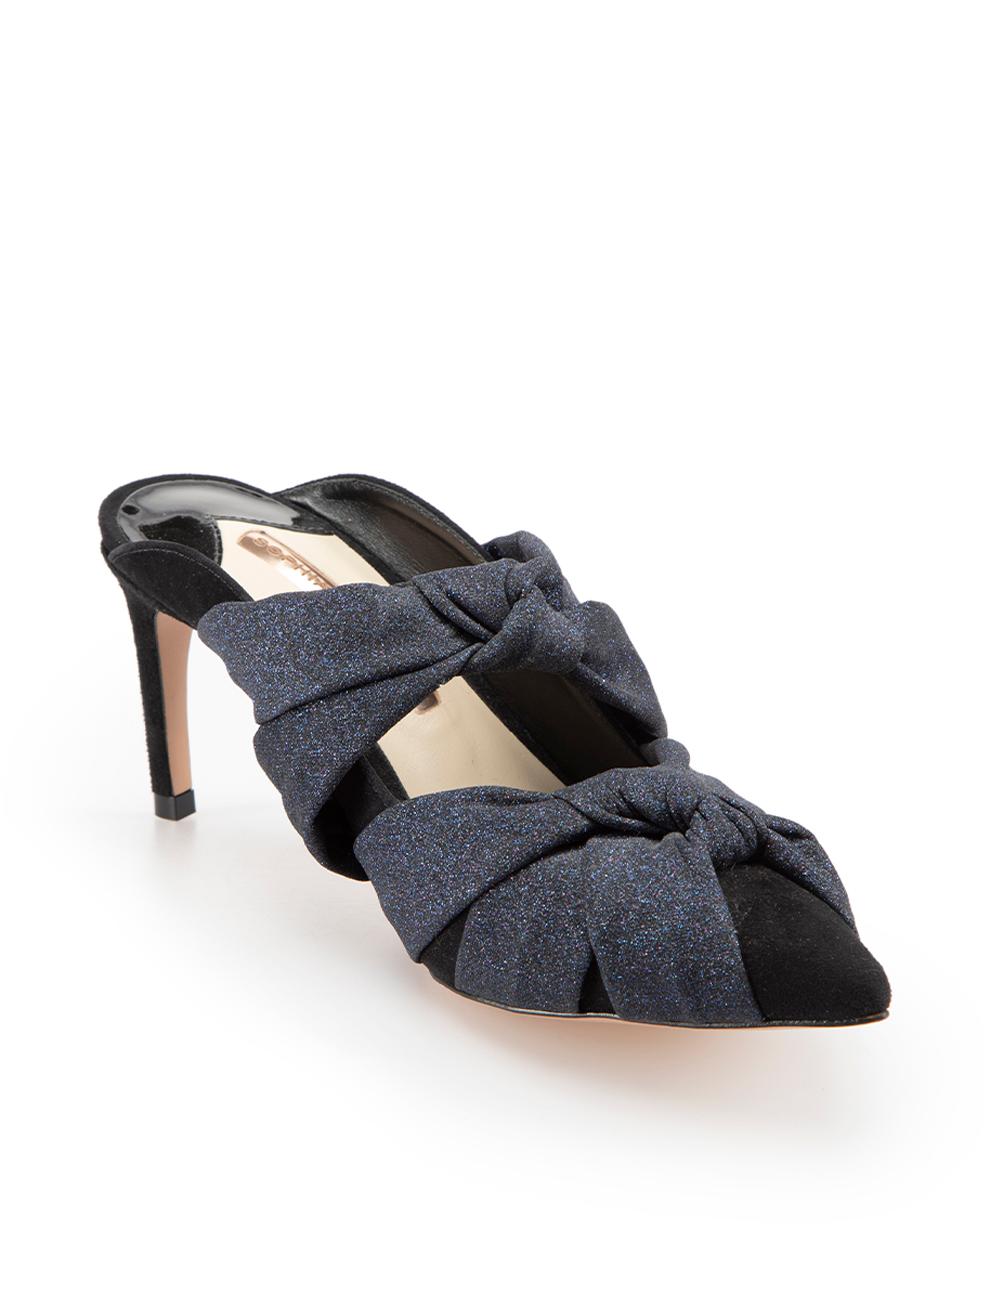 CONDITION is Very good. Hardly any visible wear to shoes is evident on this used Sophia Webster designer resale item.



Details


Navy

Suede Leather

Slip-on Mules 

Closed-toe

point-toe

Navy glitter bow detail



 

Made in